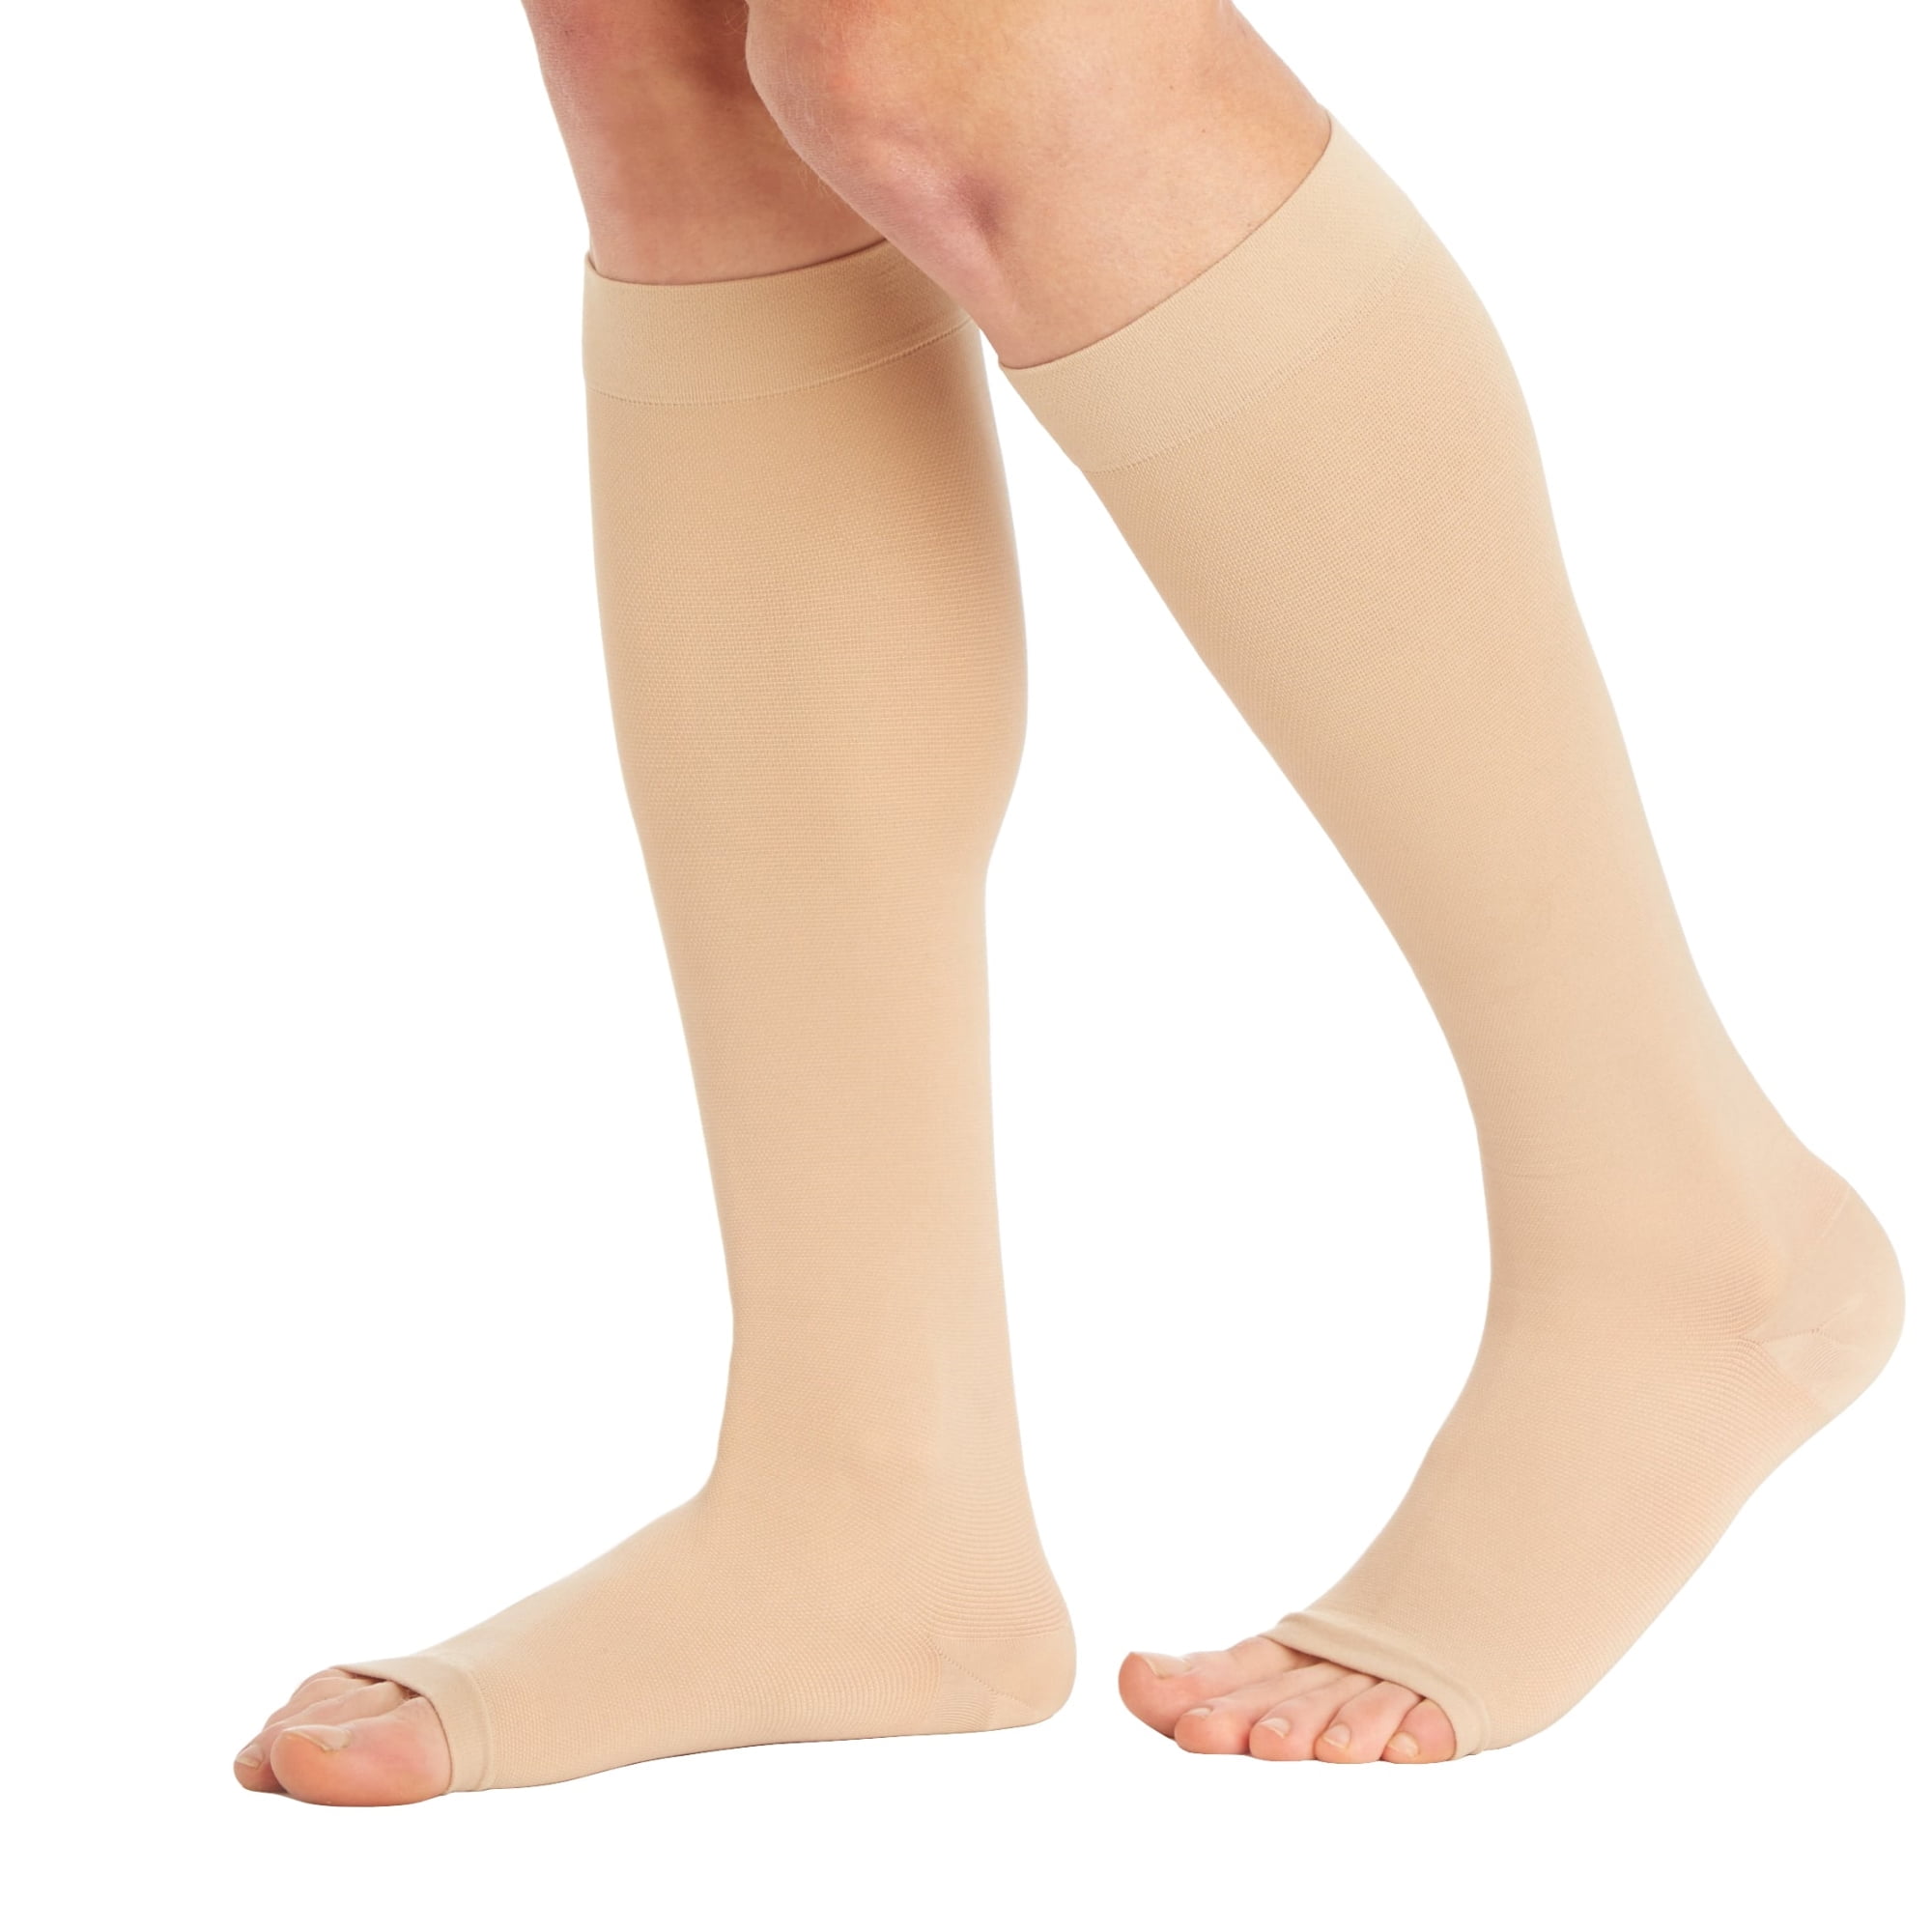 Mojo Compression Socks 20-30 Made with Coolmax and Soft Easy to get on Materials Medical Graduated Support Socks for Men and Woman Compression Stockings with Cushioned Foot and Heel 